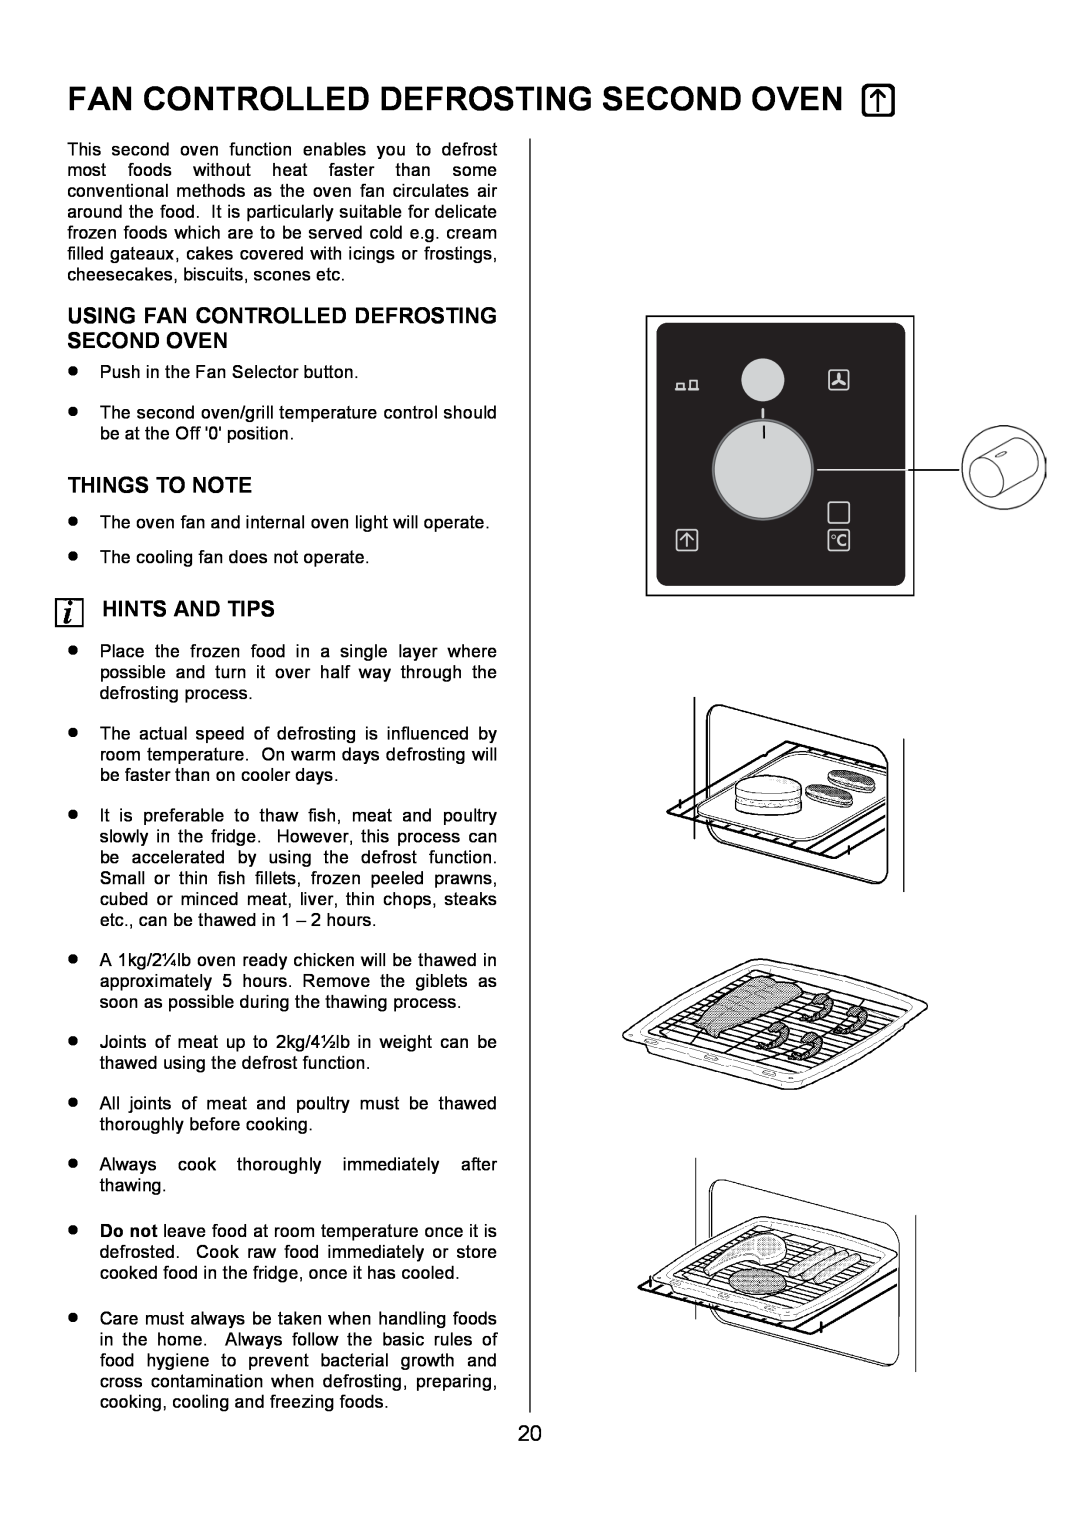 AEG U7101-4, 311704300 manual Using Fan Controlled Defrosting Second Oven, Things To Note, Hints And Tips 